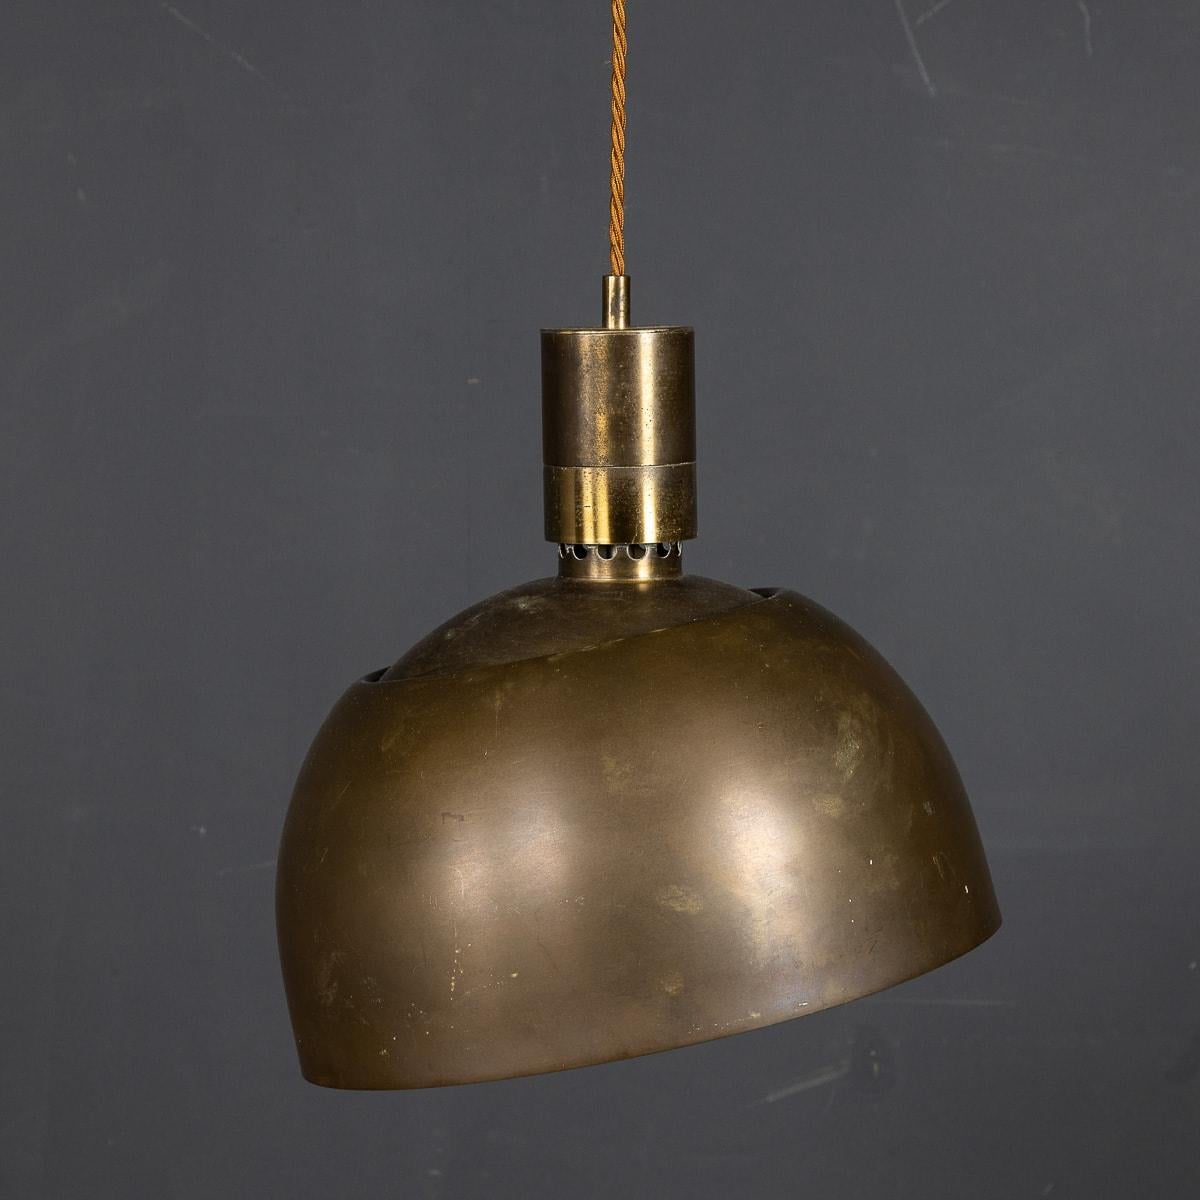 Pair of Italian Brass Articulated Wall Lights by Albini & Helg, c.1960 For Sale 2